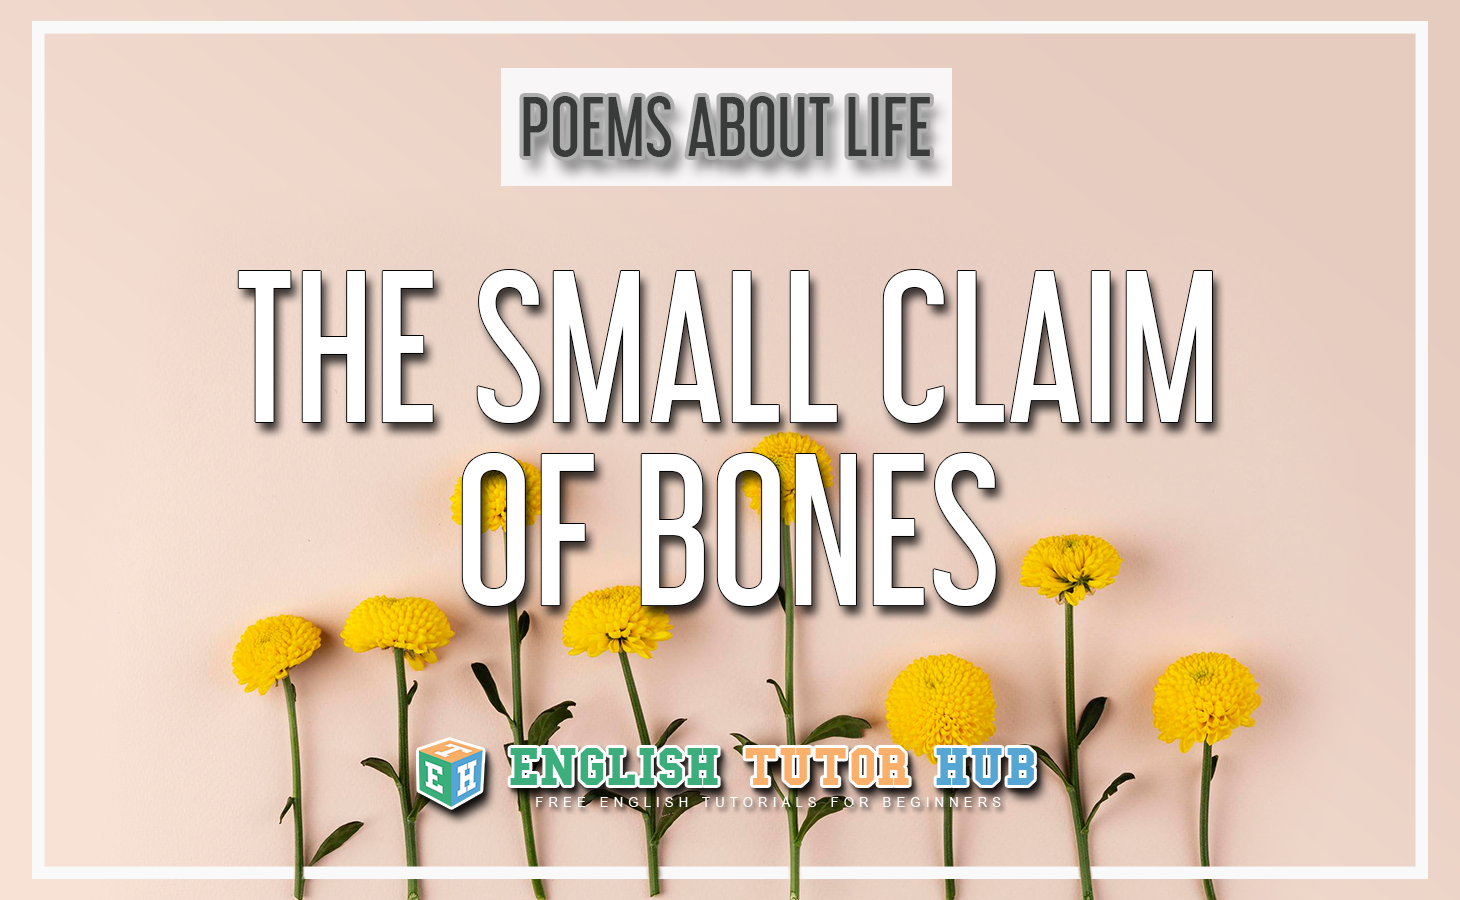 Poems About Life - The Small Claim of Bones